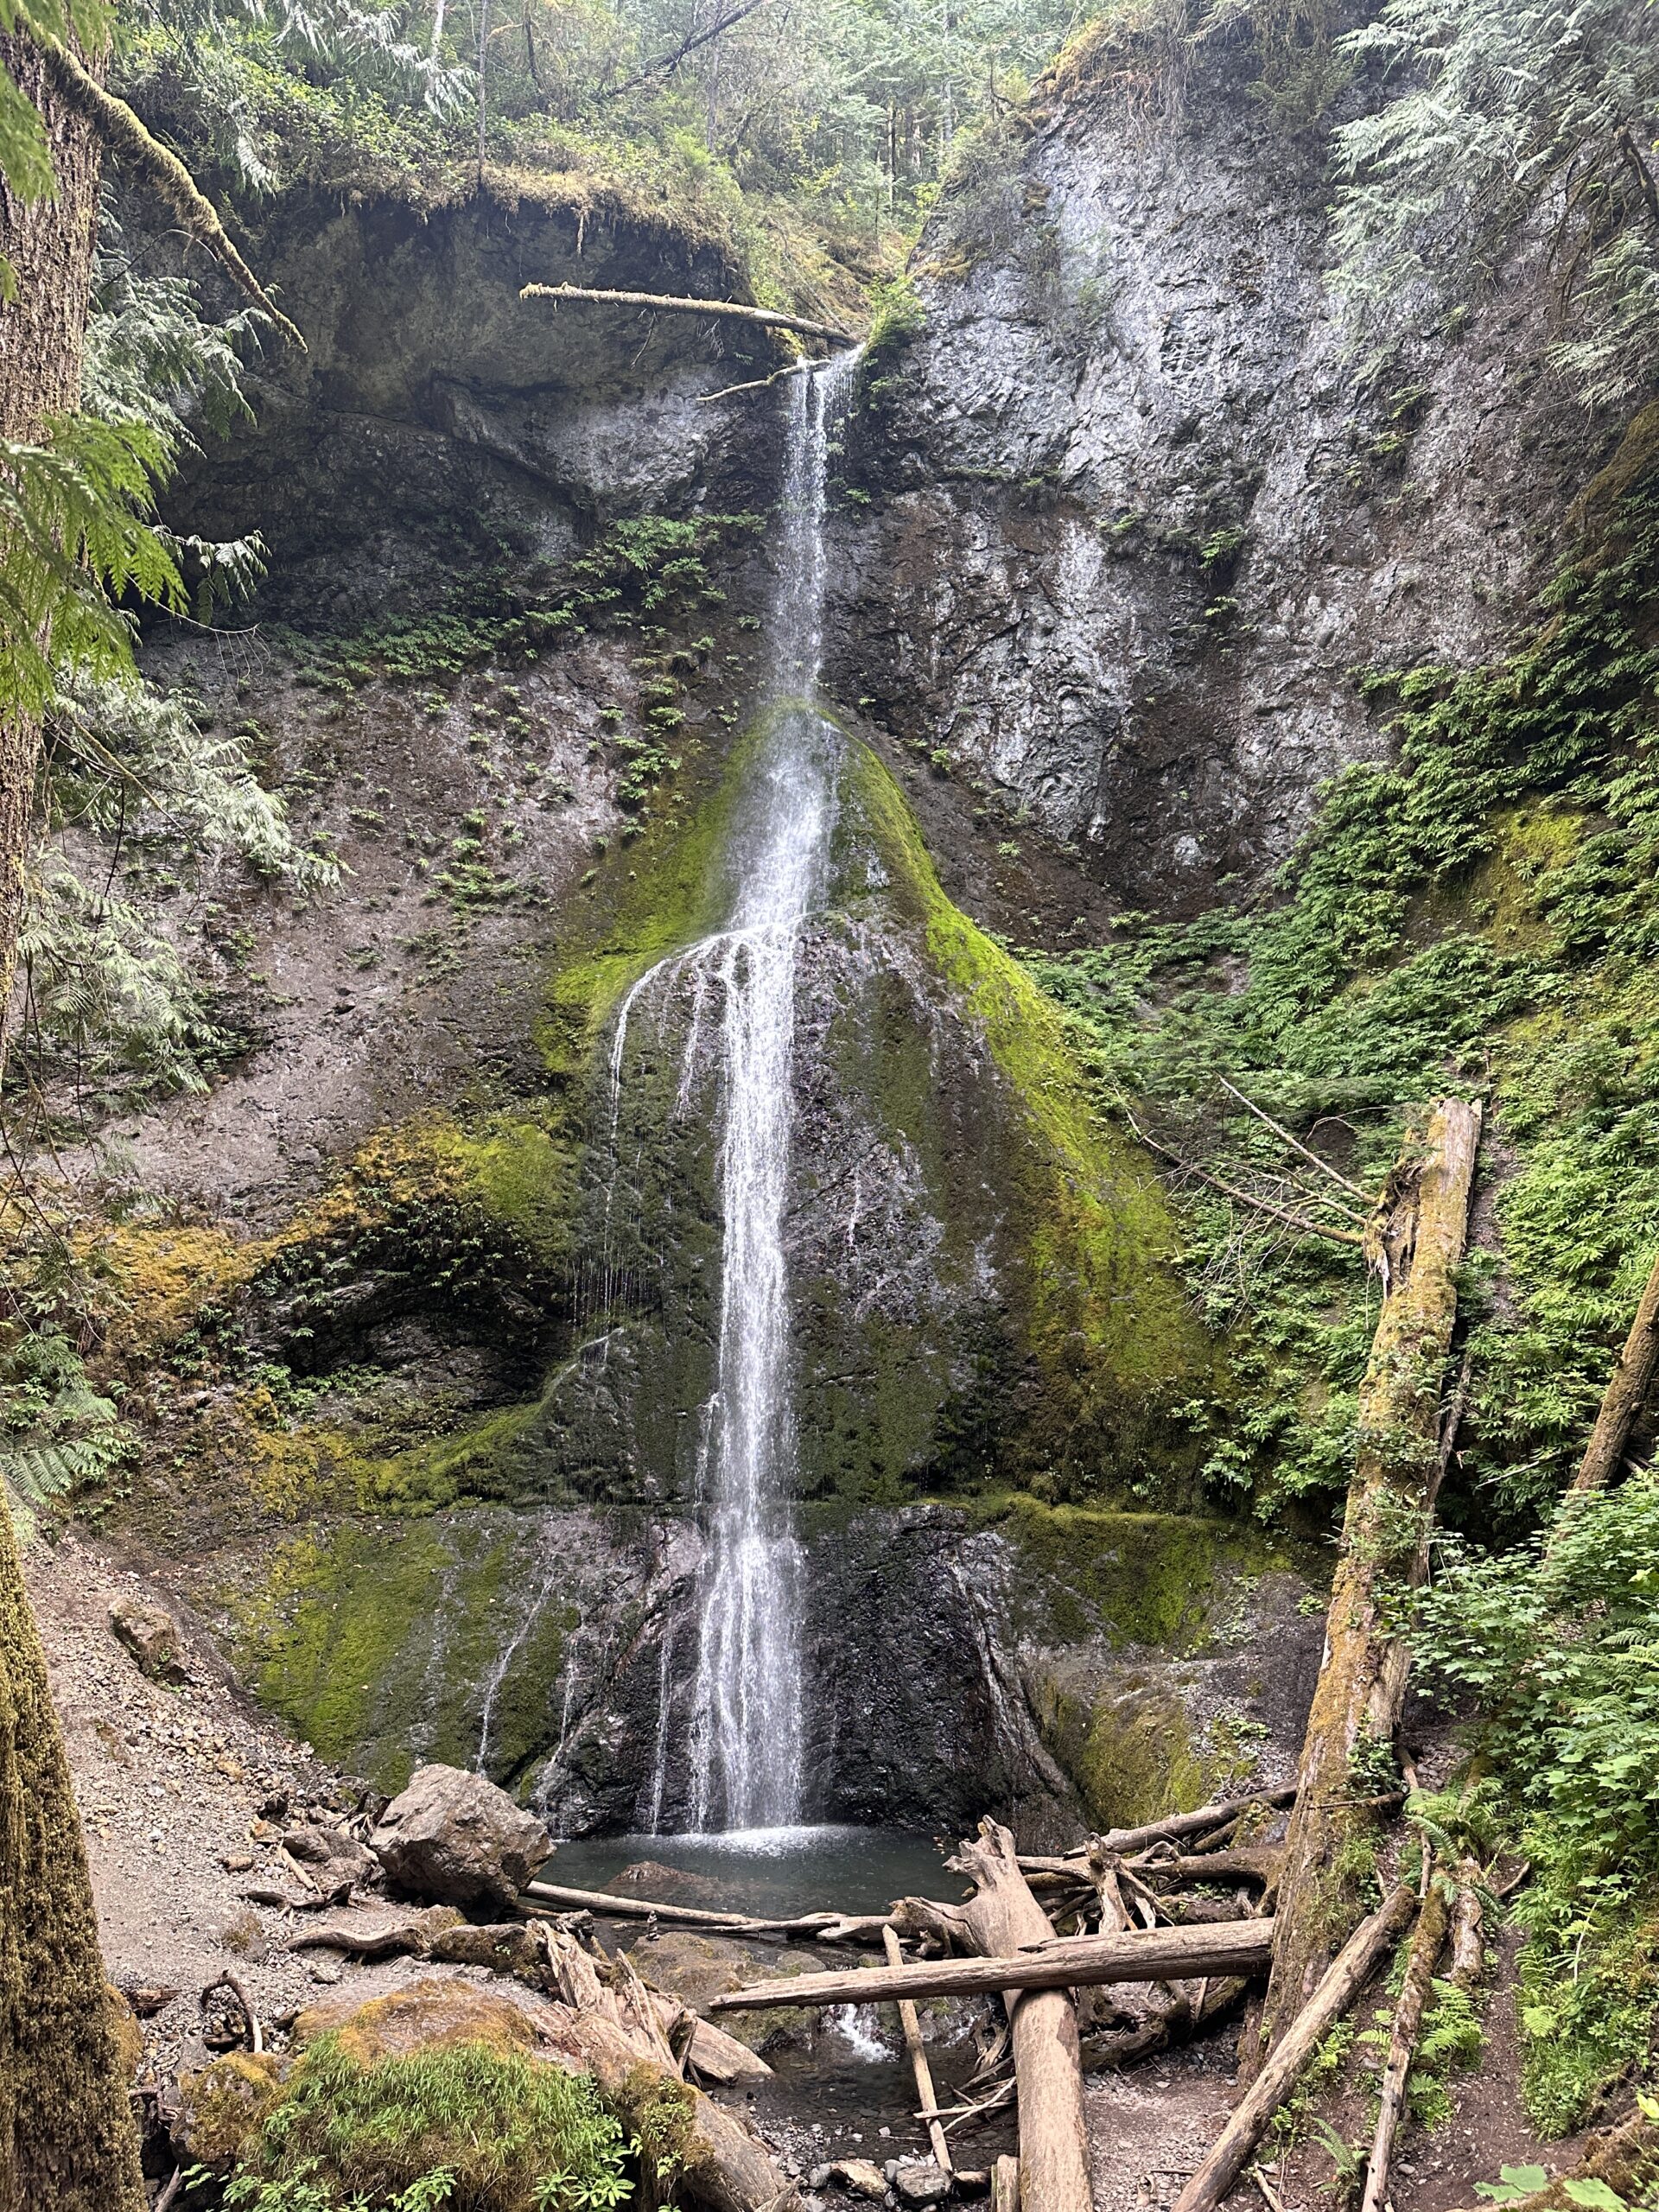 View of Marymere Falls within Olympic National Park on a short 1.5-mile loop trail near Lake Crescent during Alice Ford's 4-day solo hiking adventure in the park